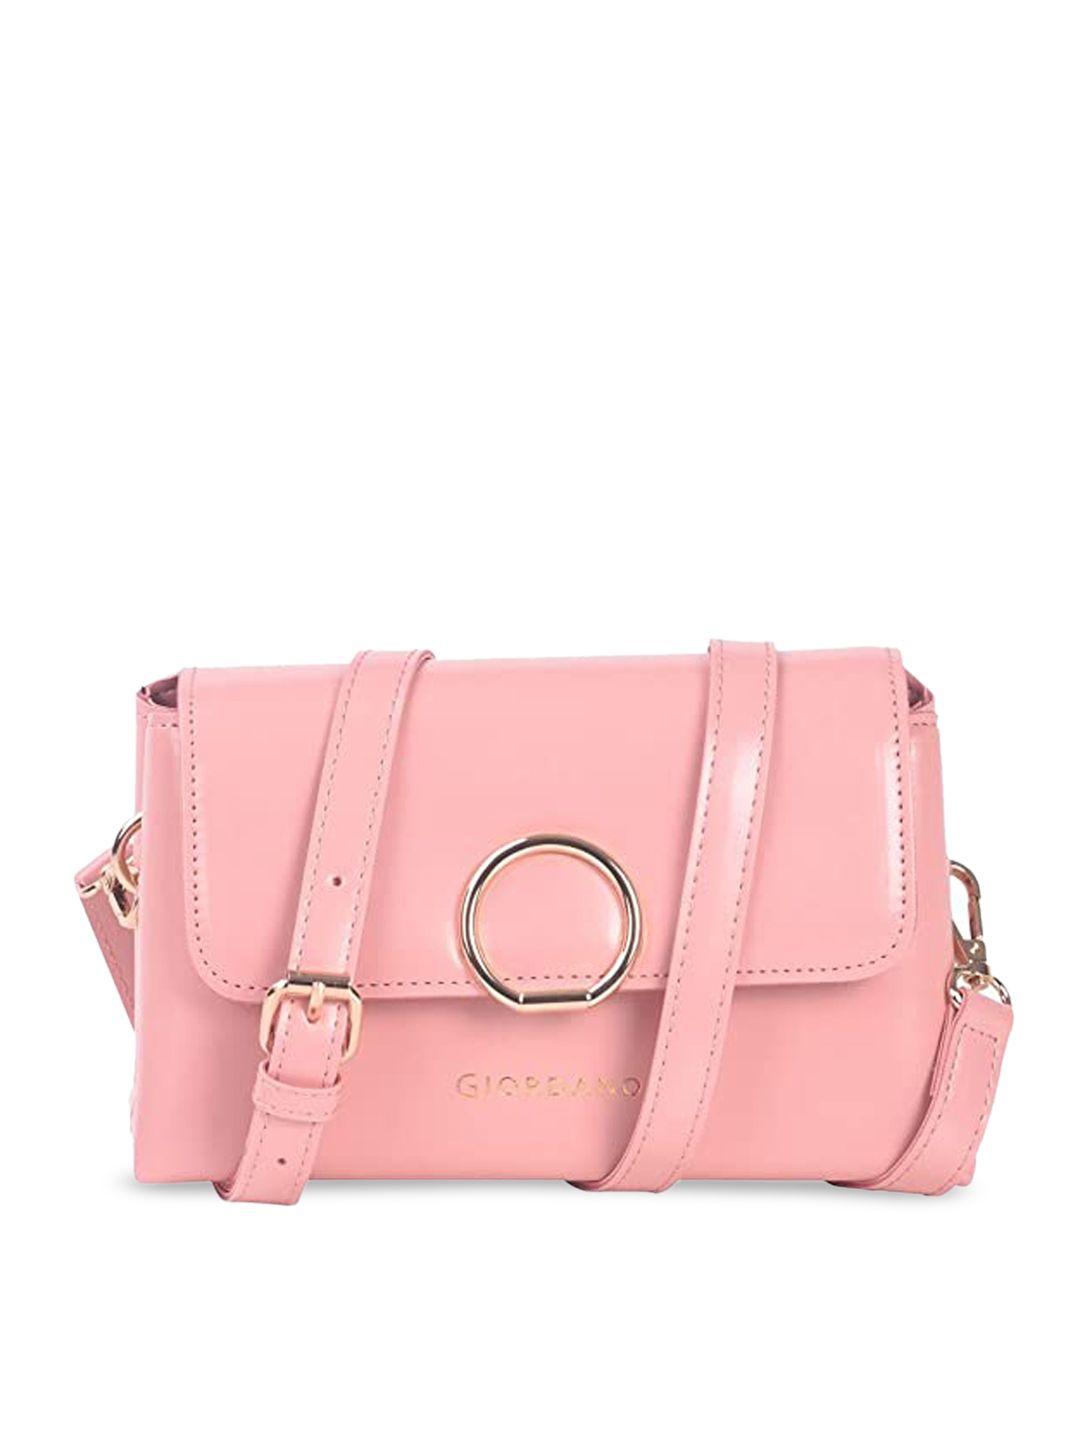 giordano pink structured sling bag